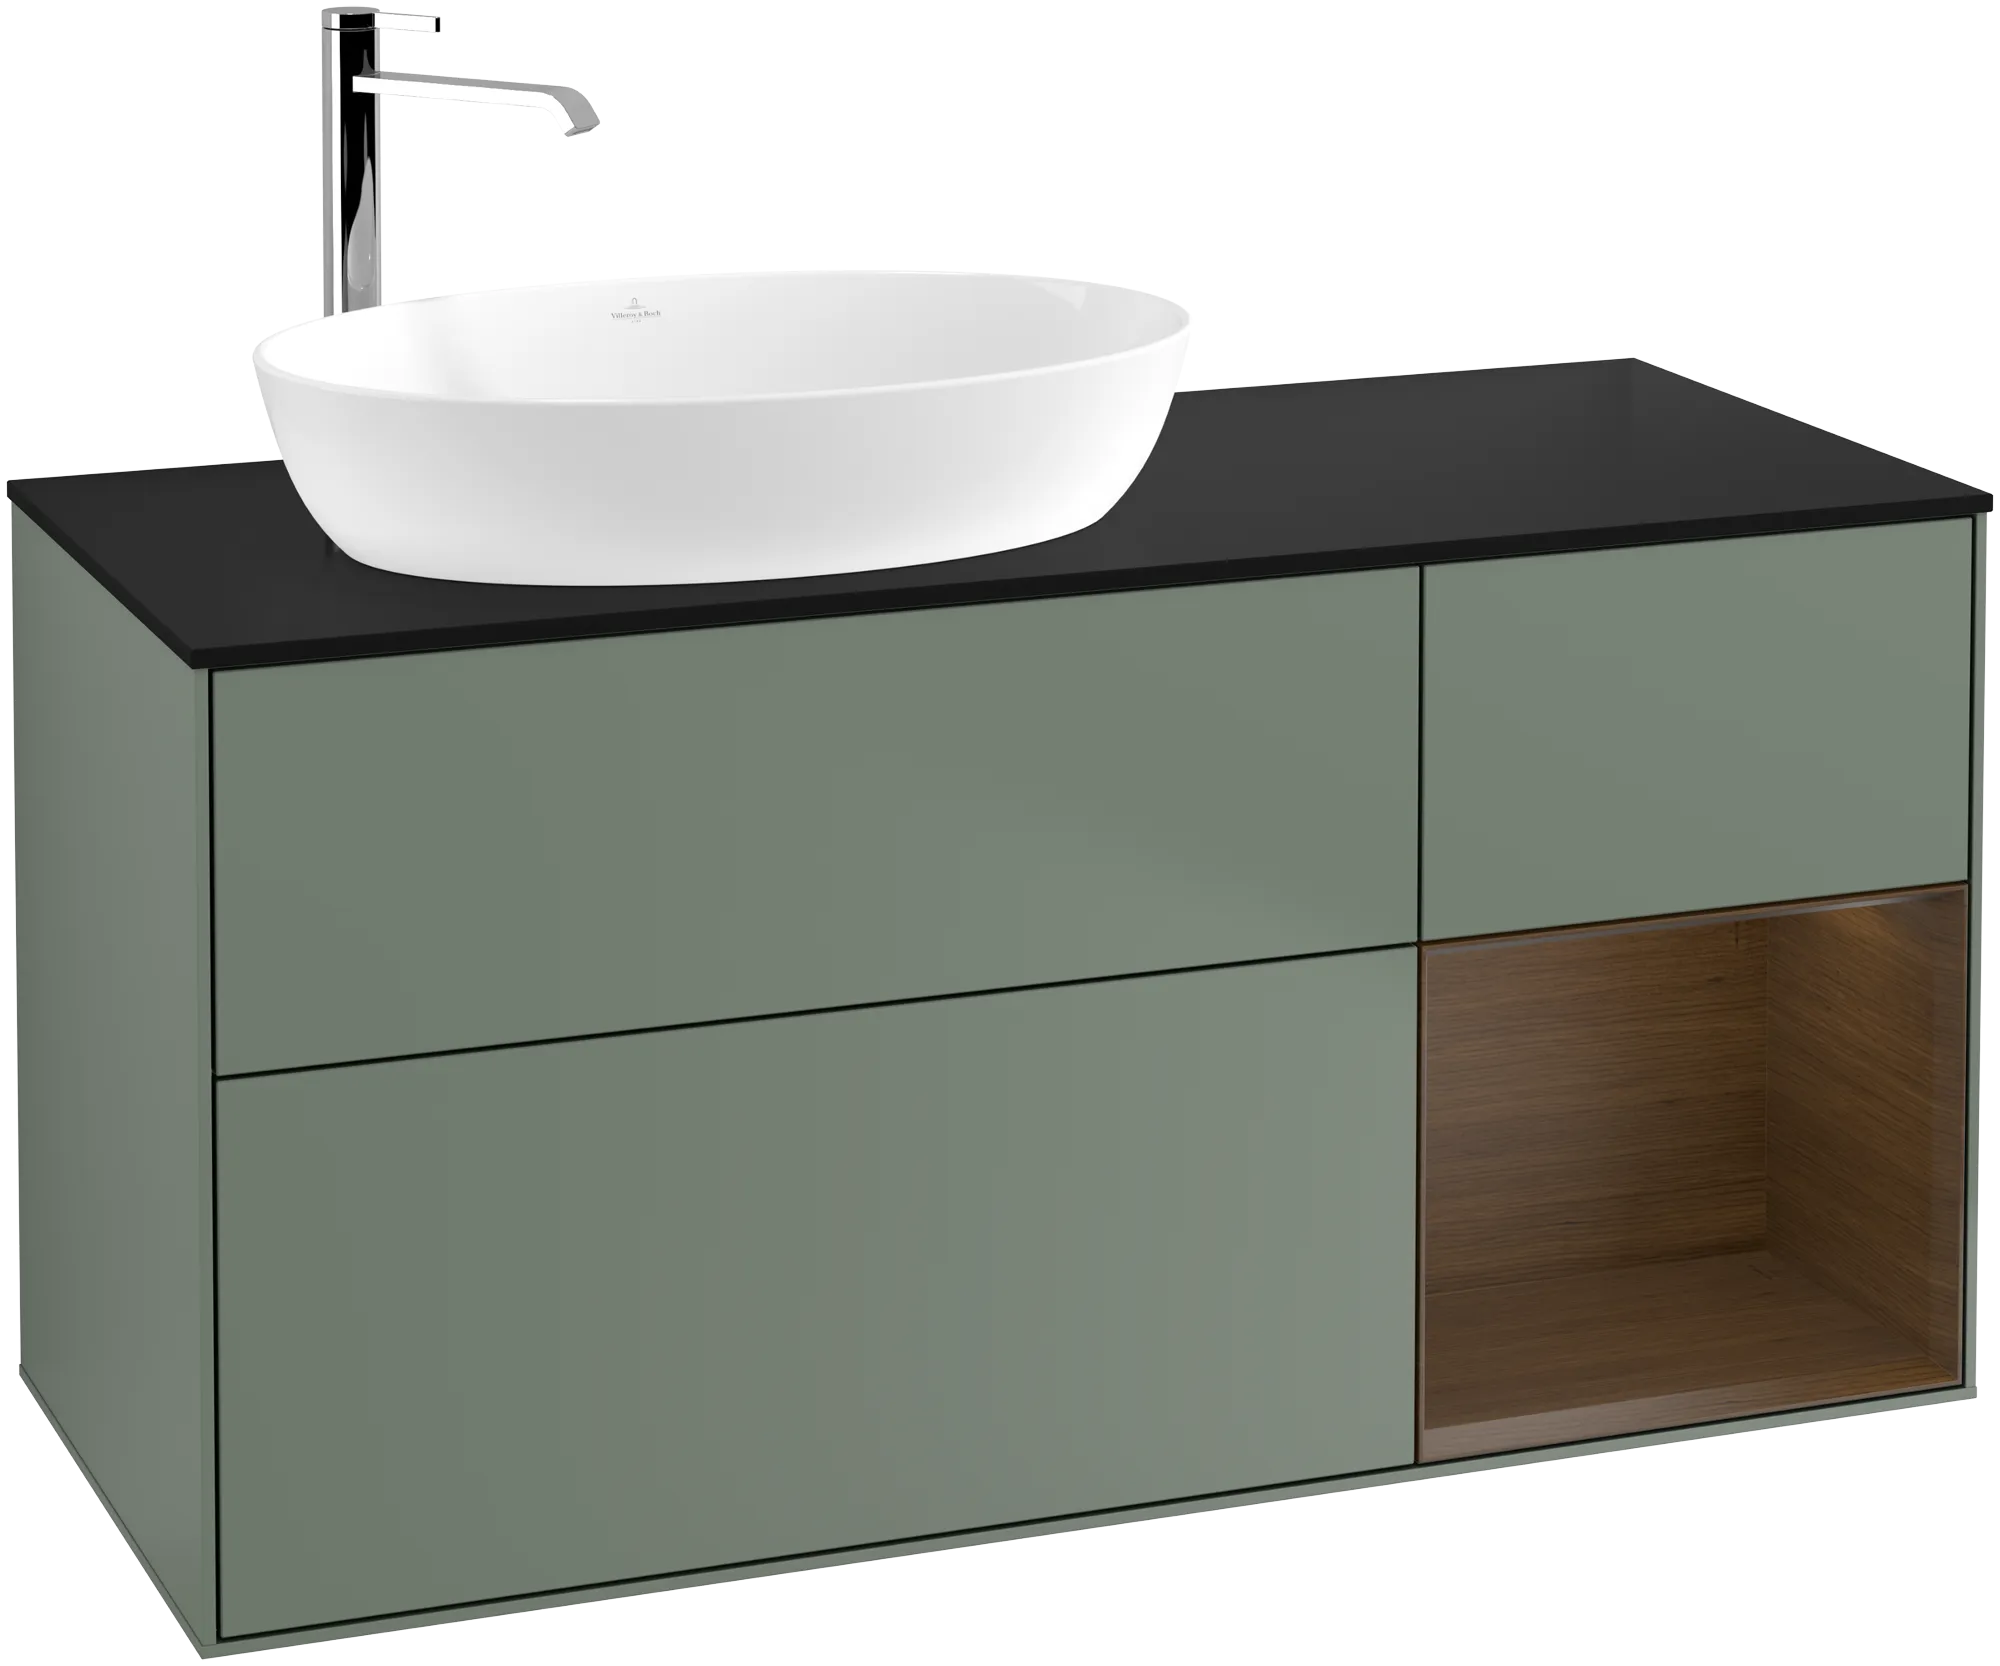 Picture of VILLEROY BOCH Finion Vanity unit, with lighting, 3 pull-out compartments, 1200 x 603 x 501 mm, Olive Matt Lacquer / Walnut Veneer / Glass Black Matt #G932GNGM